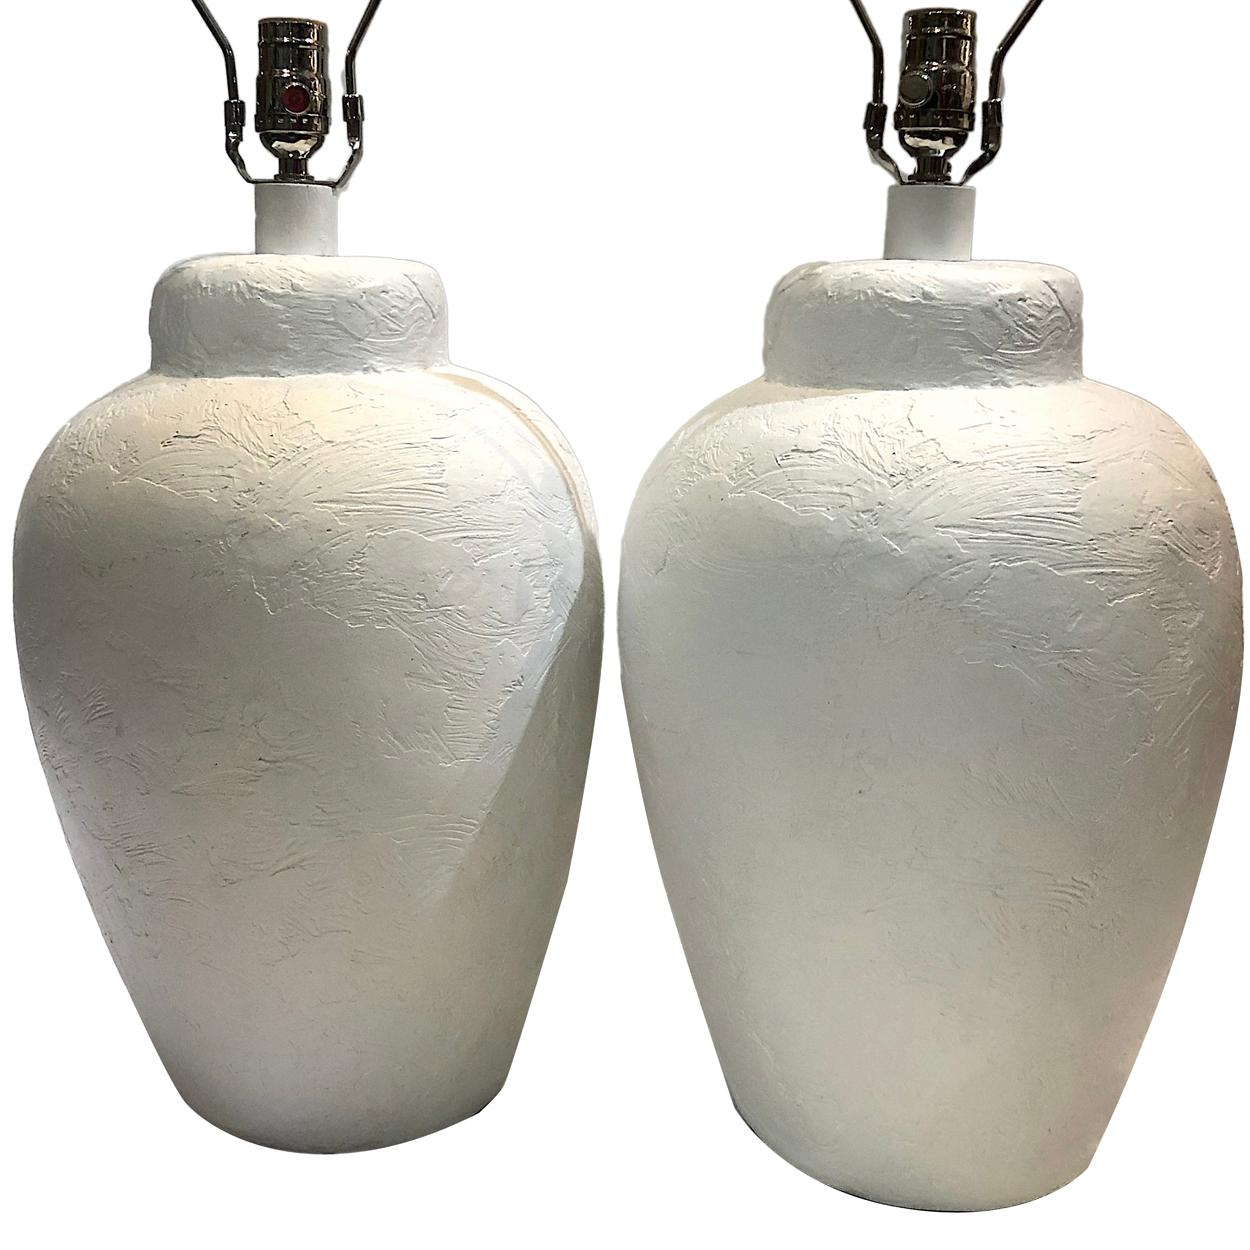 A pair of circa 1960s Italian large textured white ceramic table lamps.

Measurements:
Height of body 21